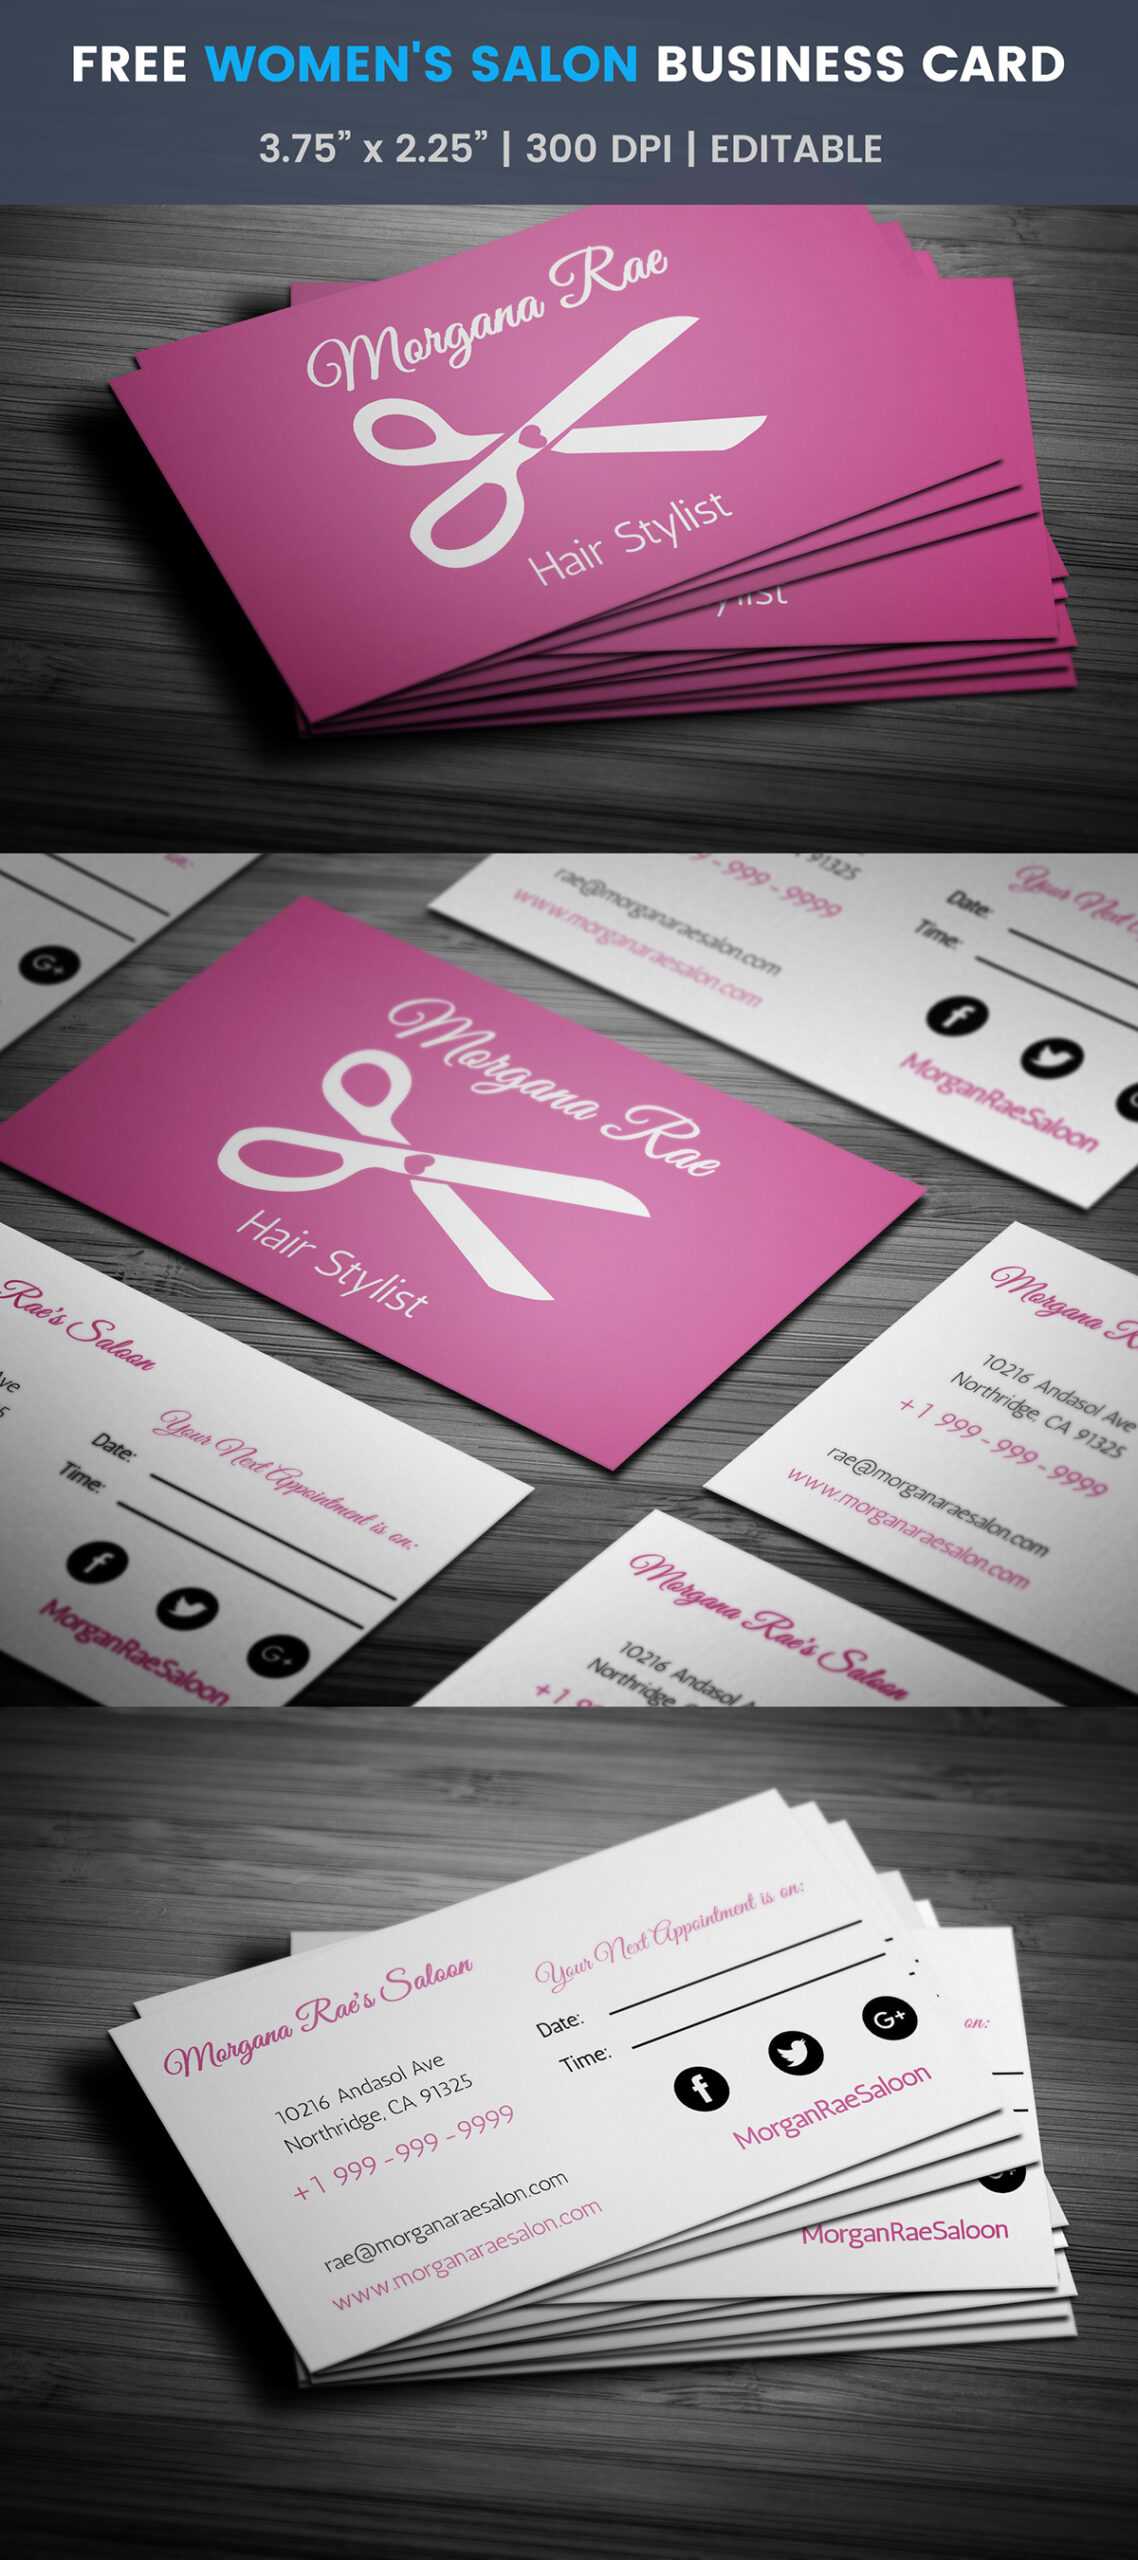 Hairdresser Business Card Templates Free - Calep.midnightpig.co Throughout Hairdresser Business Card Templates Free